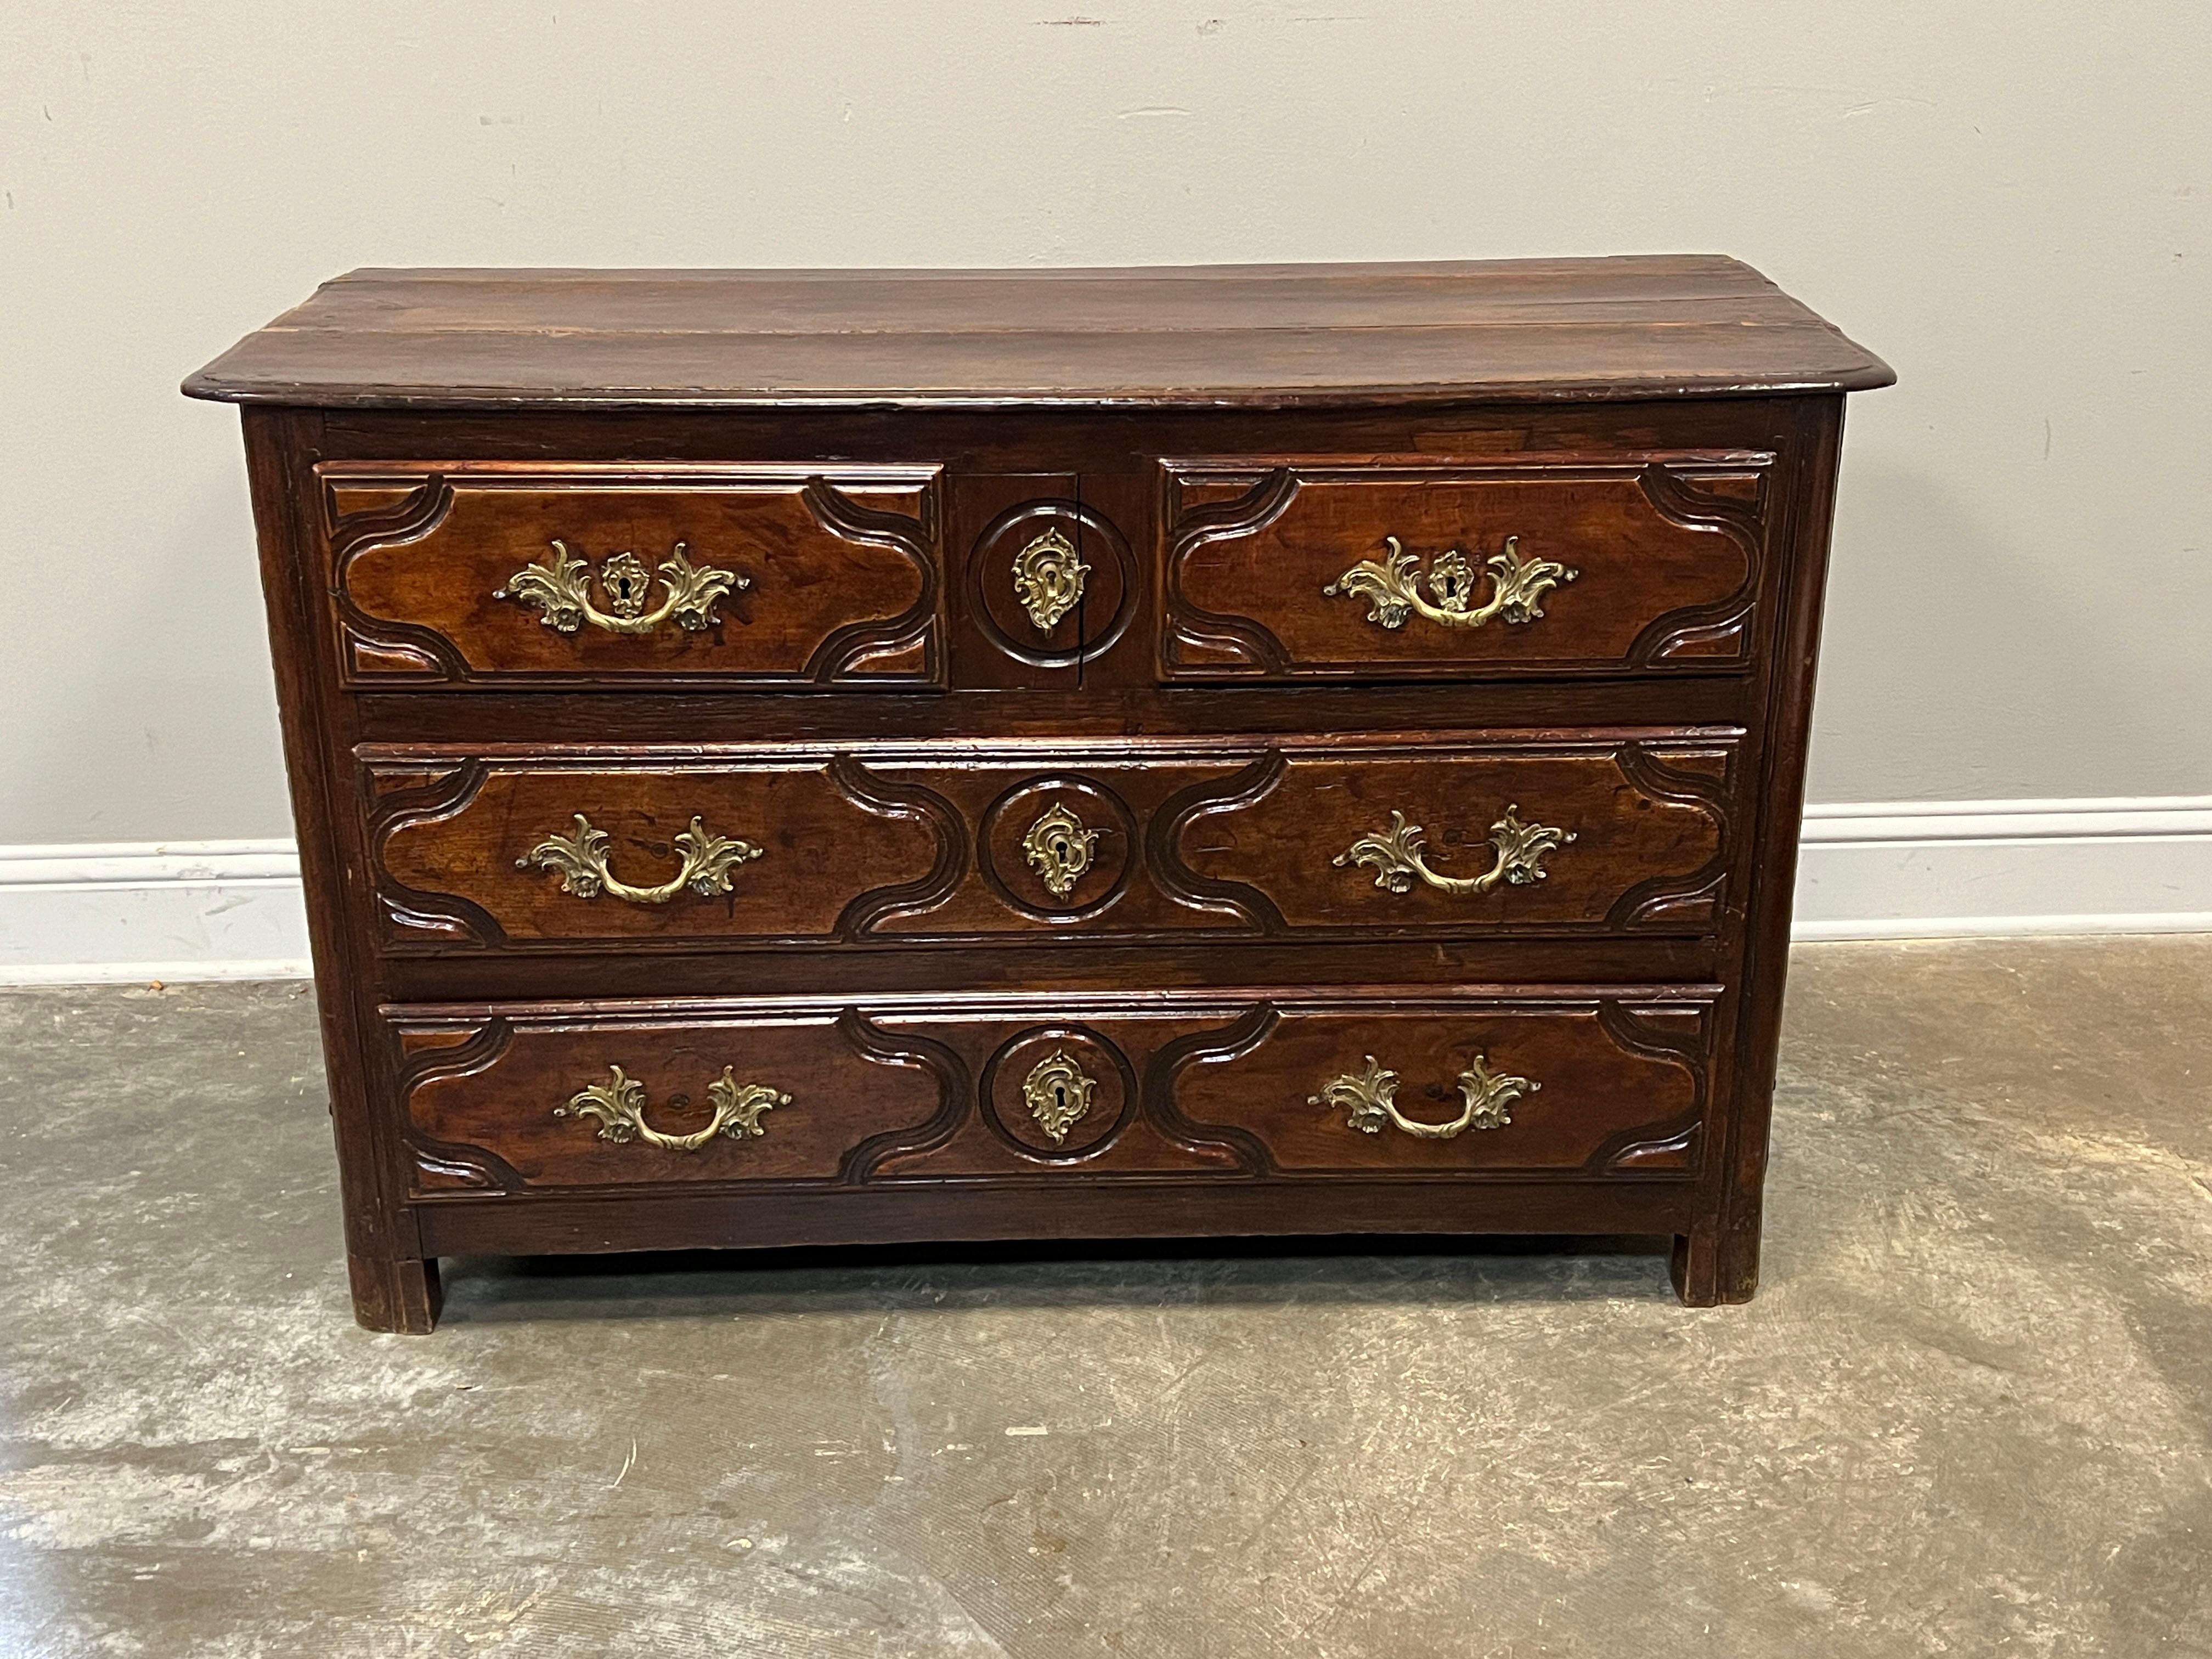 Classic Provincial Louis XV to Louis XVI transitional commode in walnut with original hardware. Straight traverse, two drawers over two long drawers. The commode is hand constructed with dowels on mortise and tenons and drawers have dovetailed